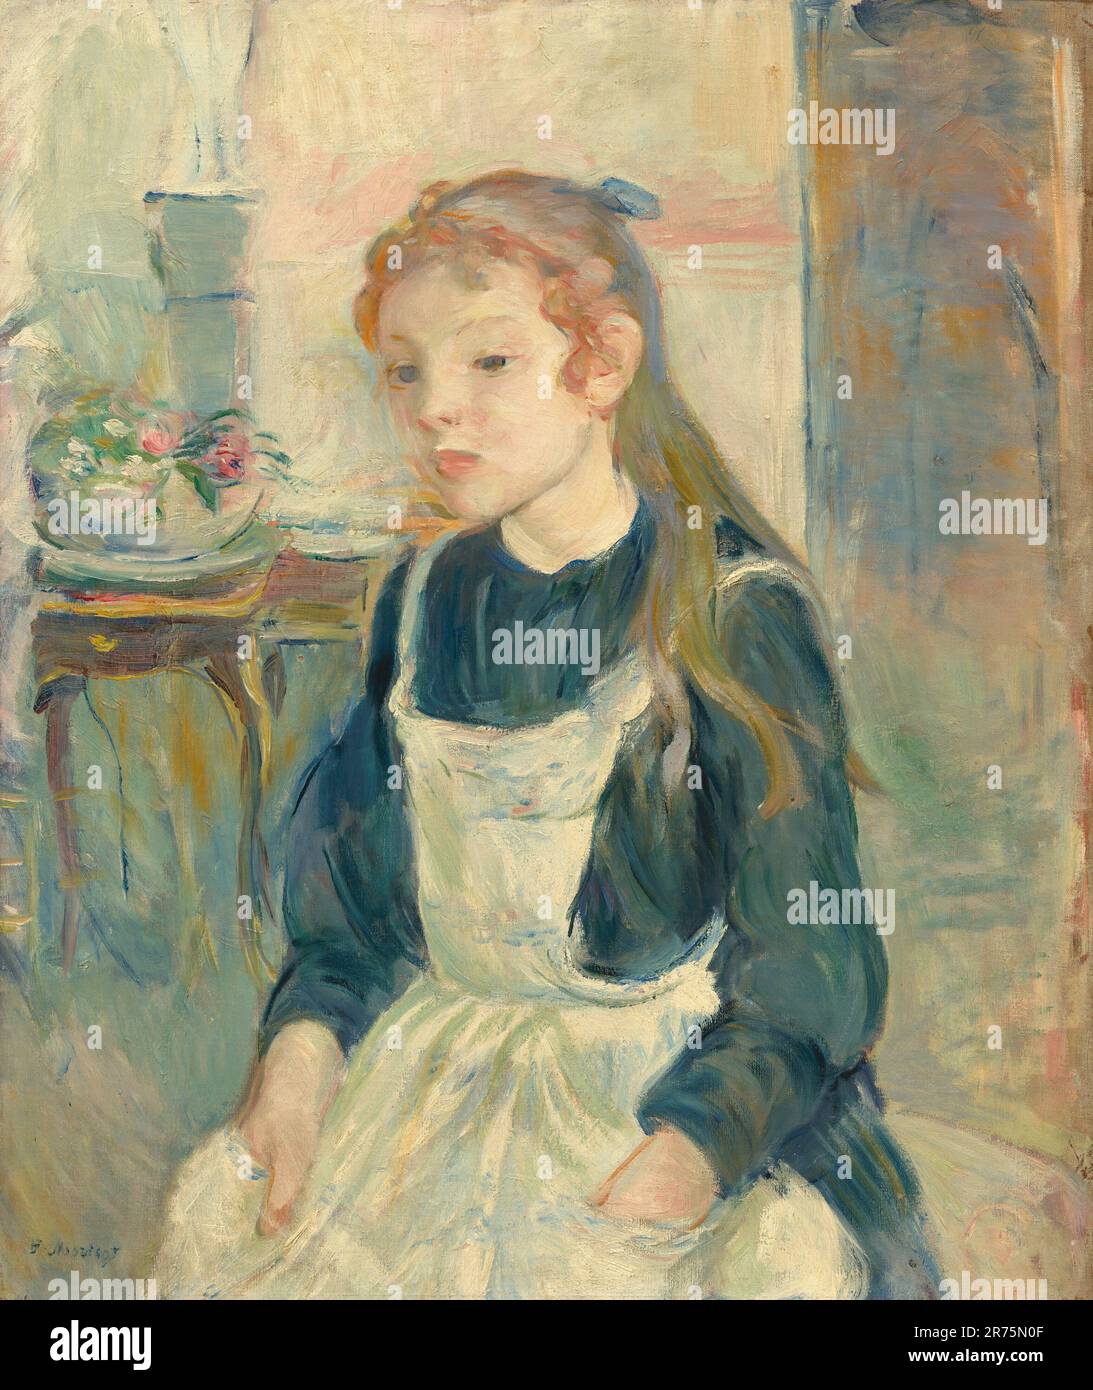 Berthe Morisot  Young Girl with an Apron, 1891 Stock Photo